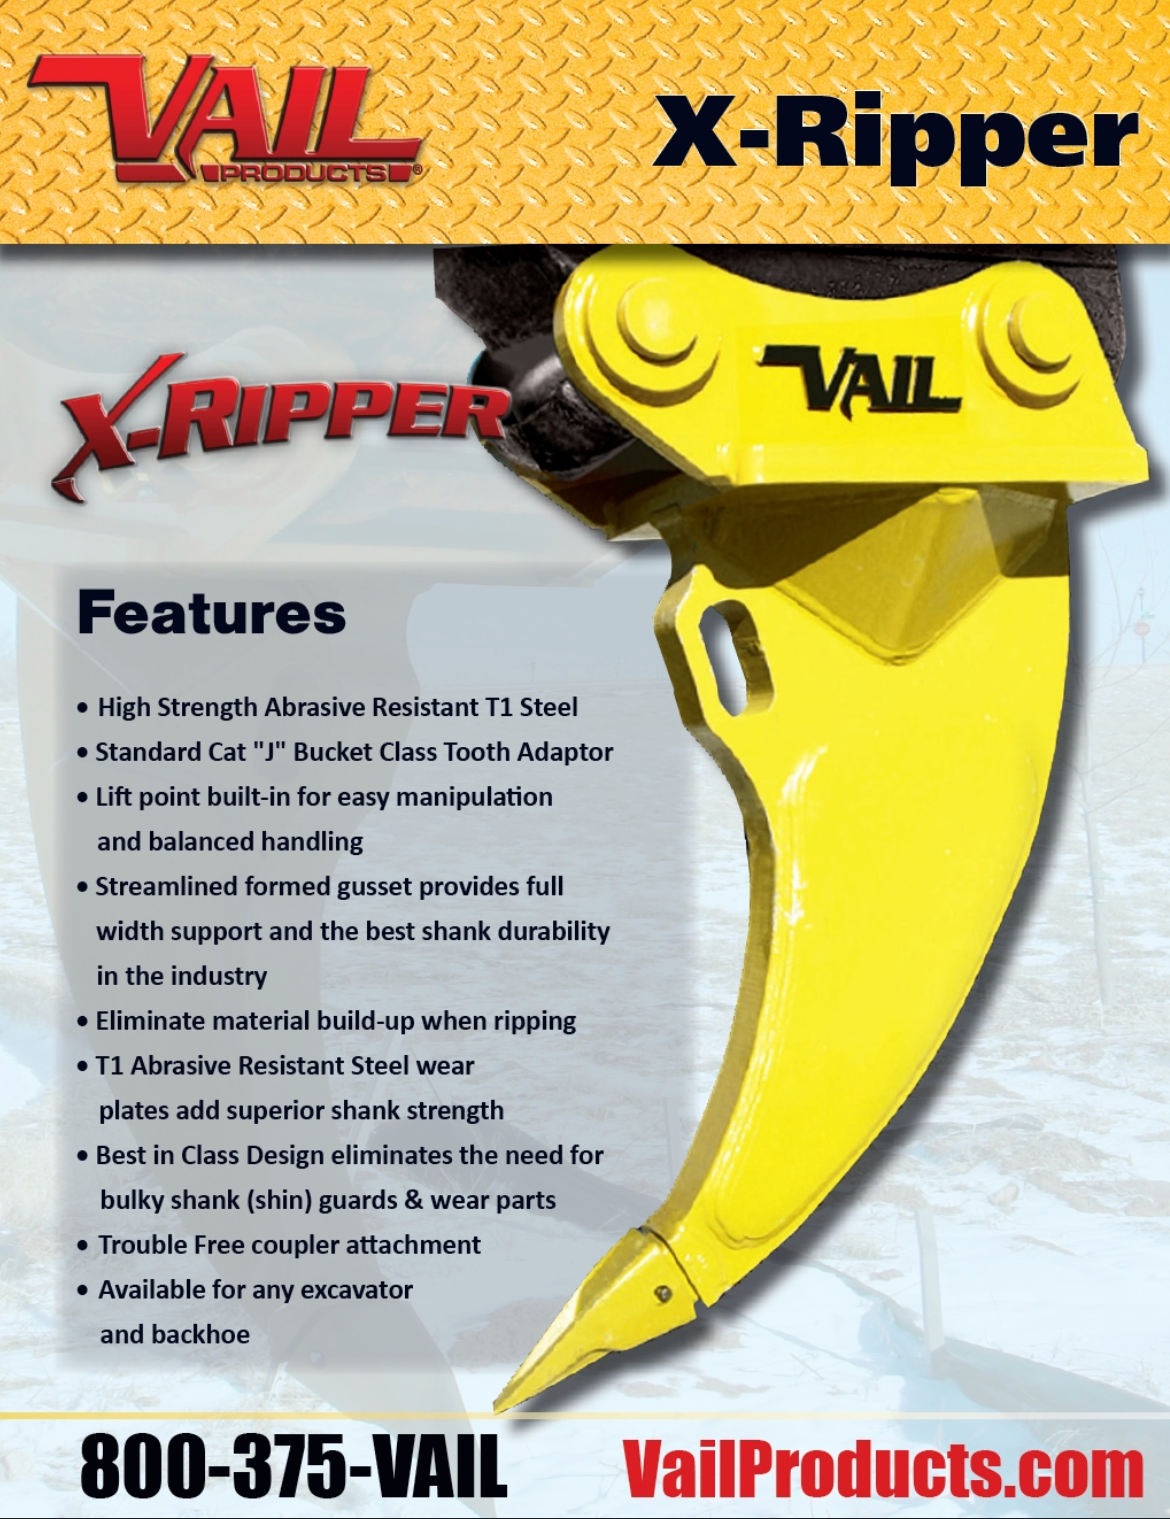 VAIL PRODUCTS X-RIPPER FOR EXCAVATOR AND BACKHOE